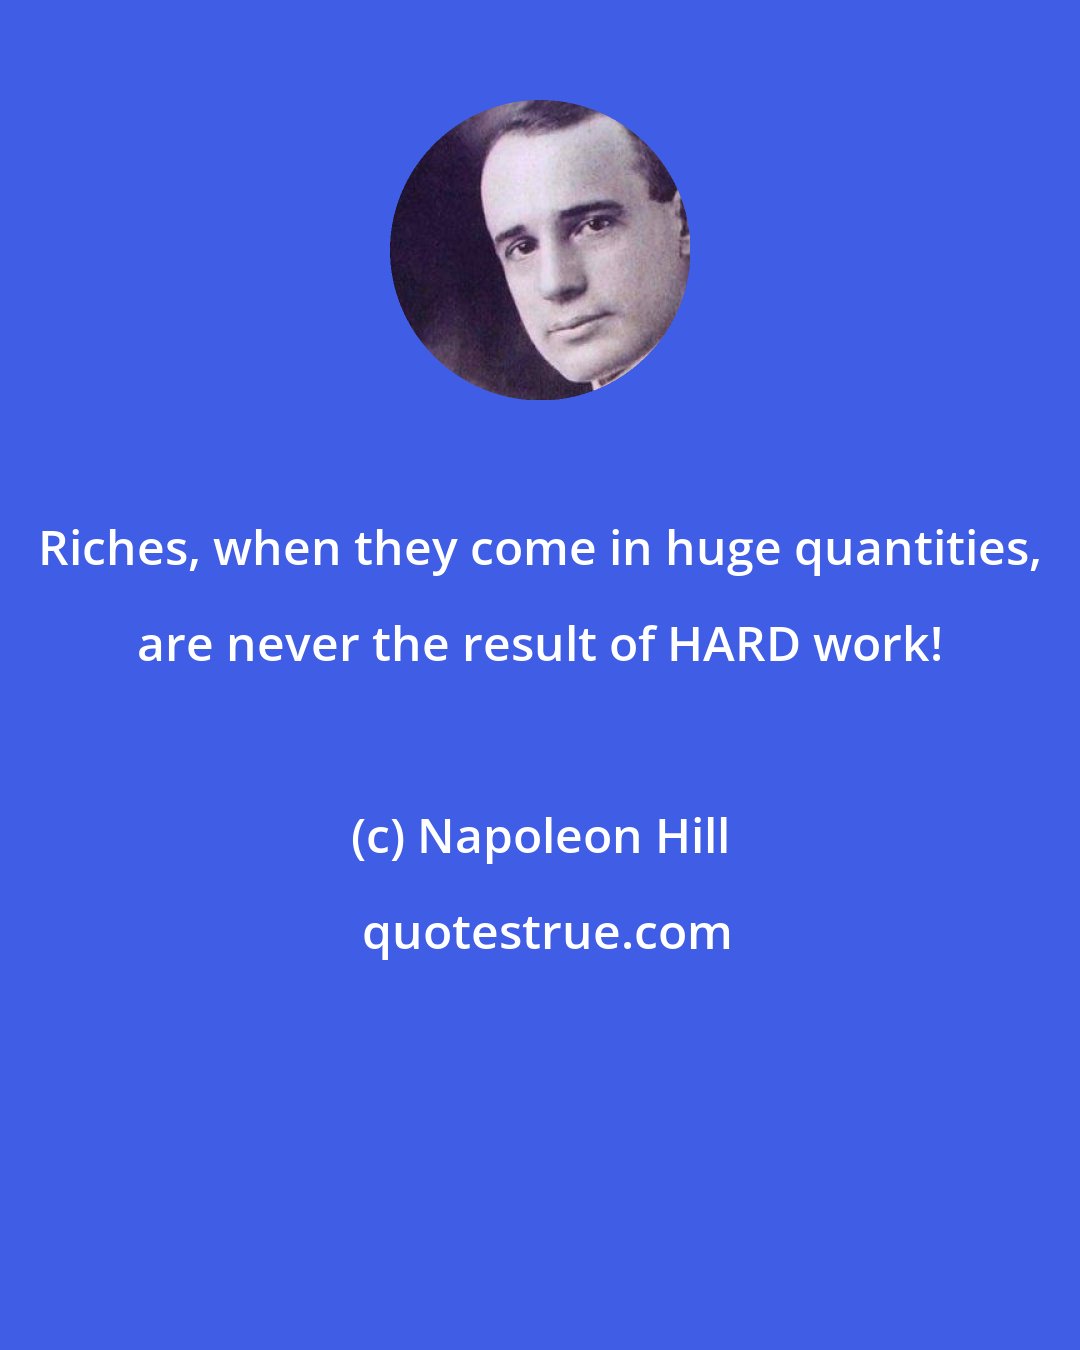 Napoleon Hill: Riches, when they come in huge quantities, are never the result of HARD work!